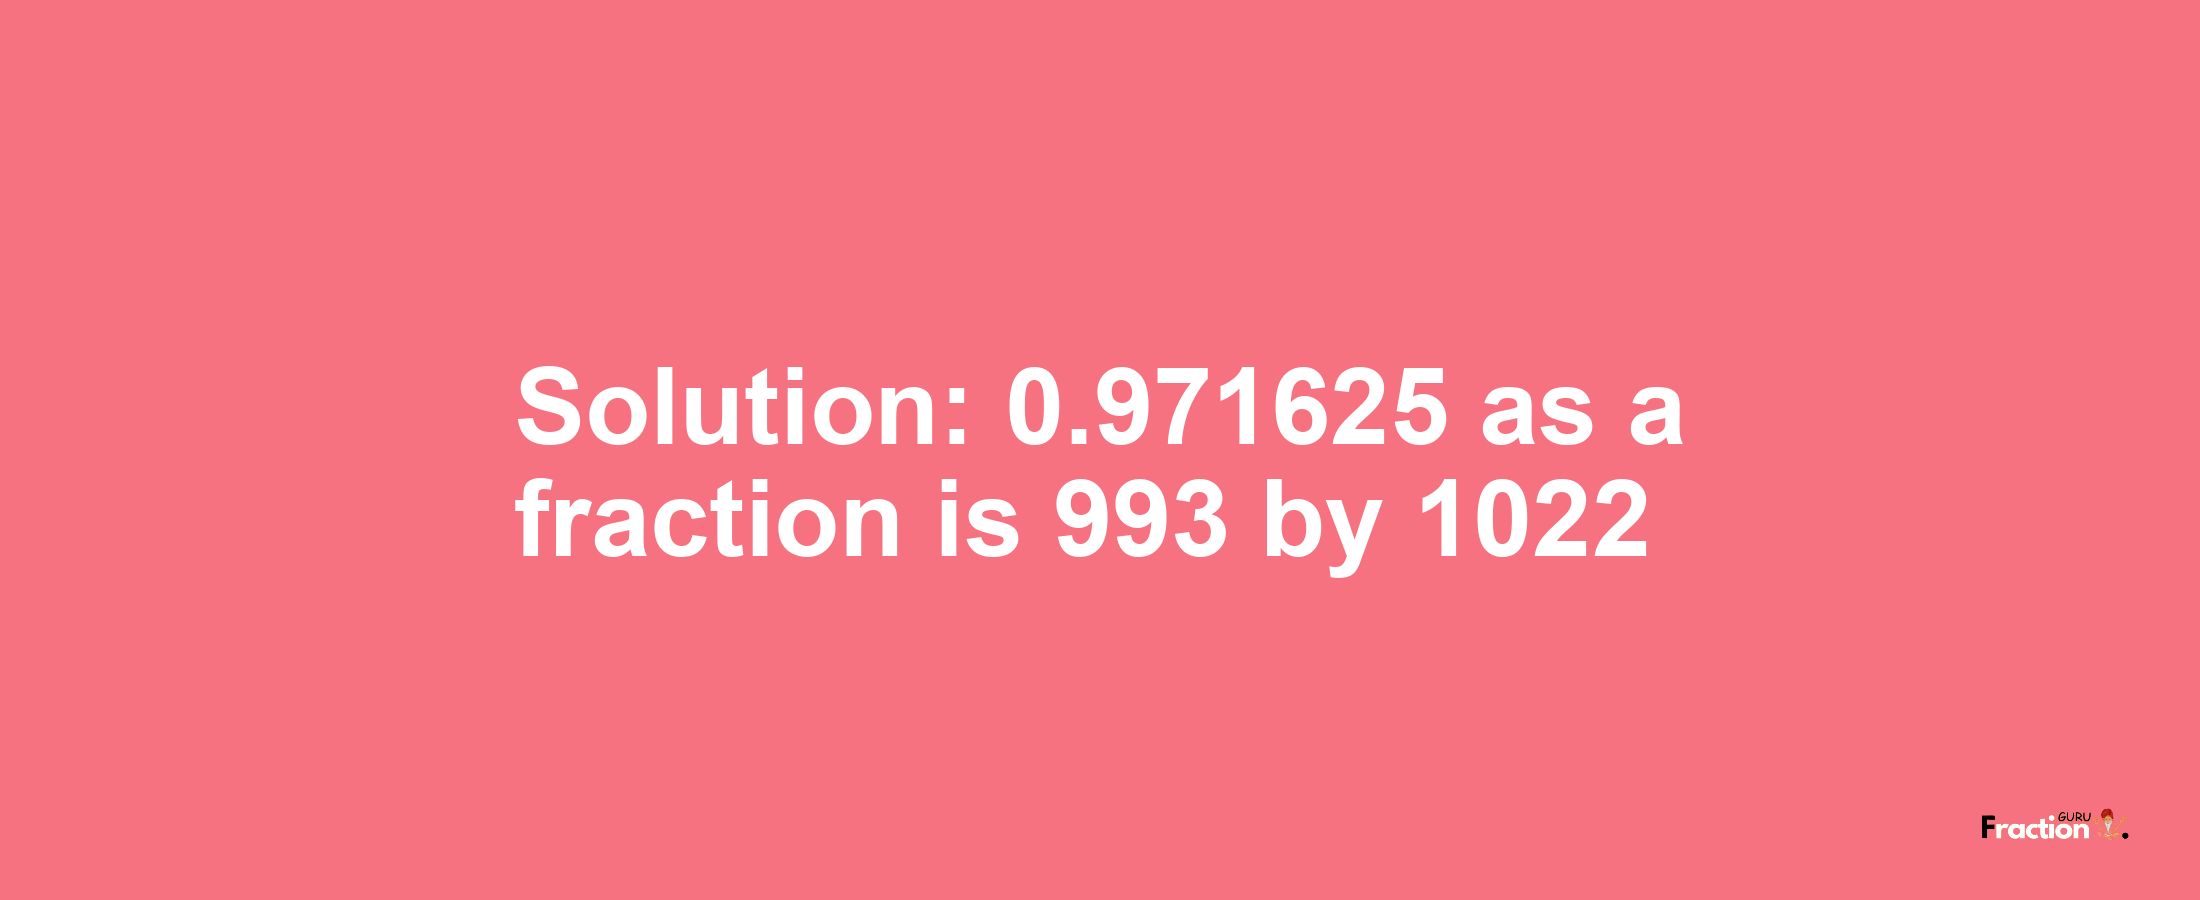 Solution:0.971625 as a fraction is 993/1022